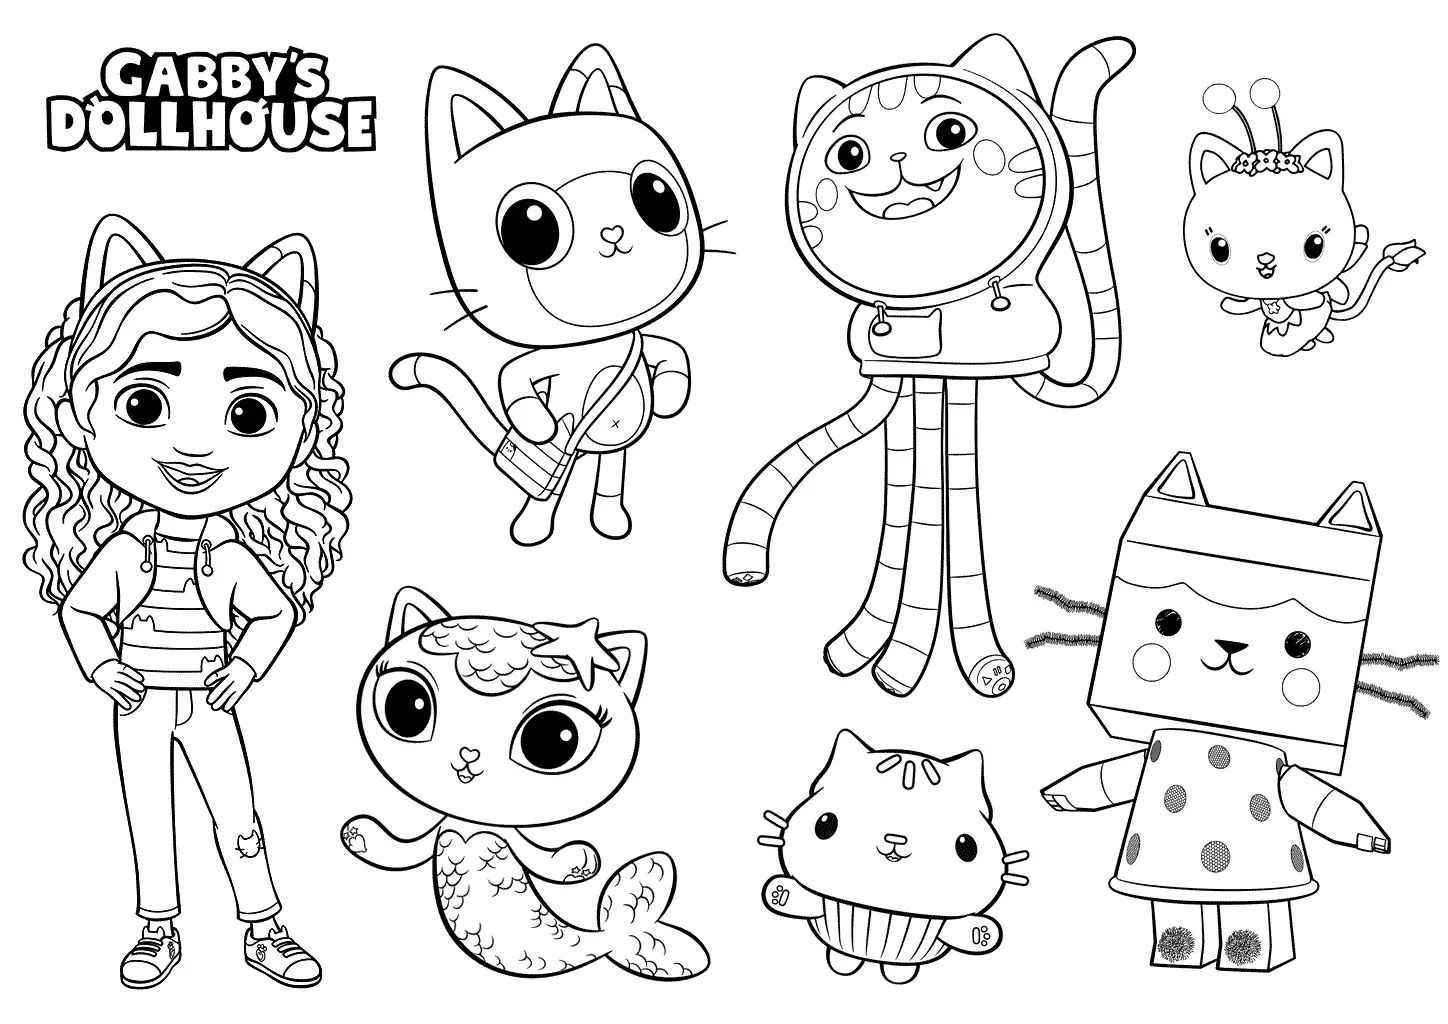 Printable Gabby's Dollhouse Coloring Pages Pdf - Coloringfolder.com